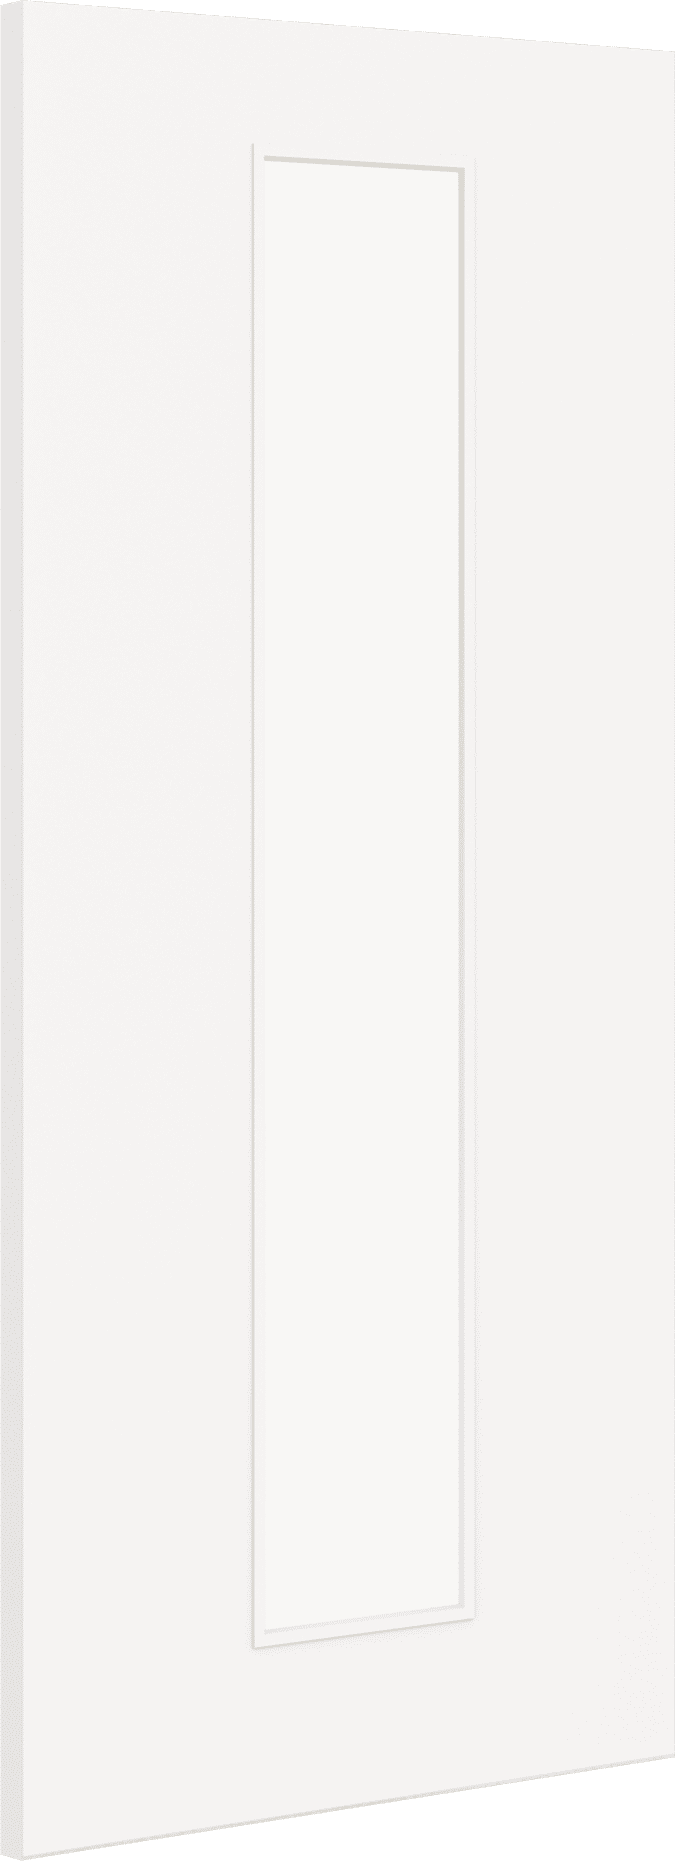 2040mm x 726mm x 44mm Architectural Paint Grade White 10 Clear Glazed Fire Door Blank